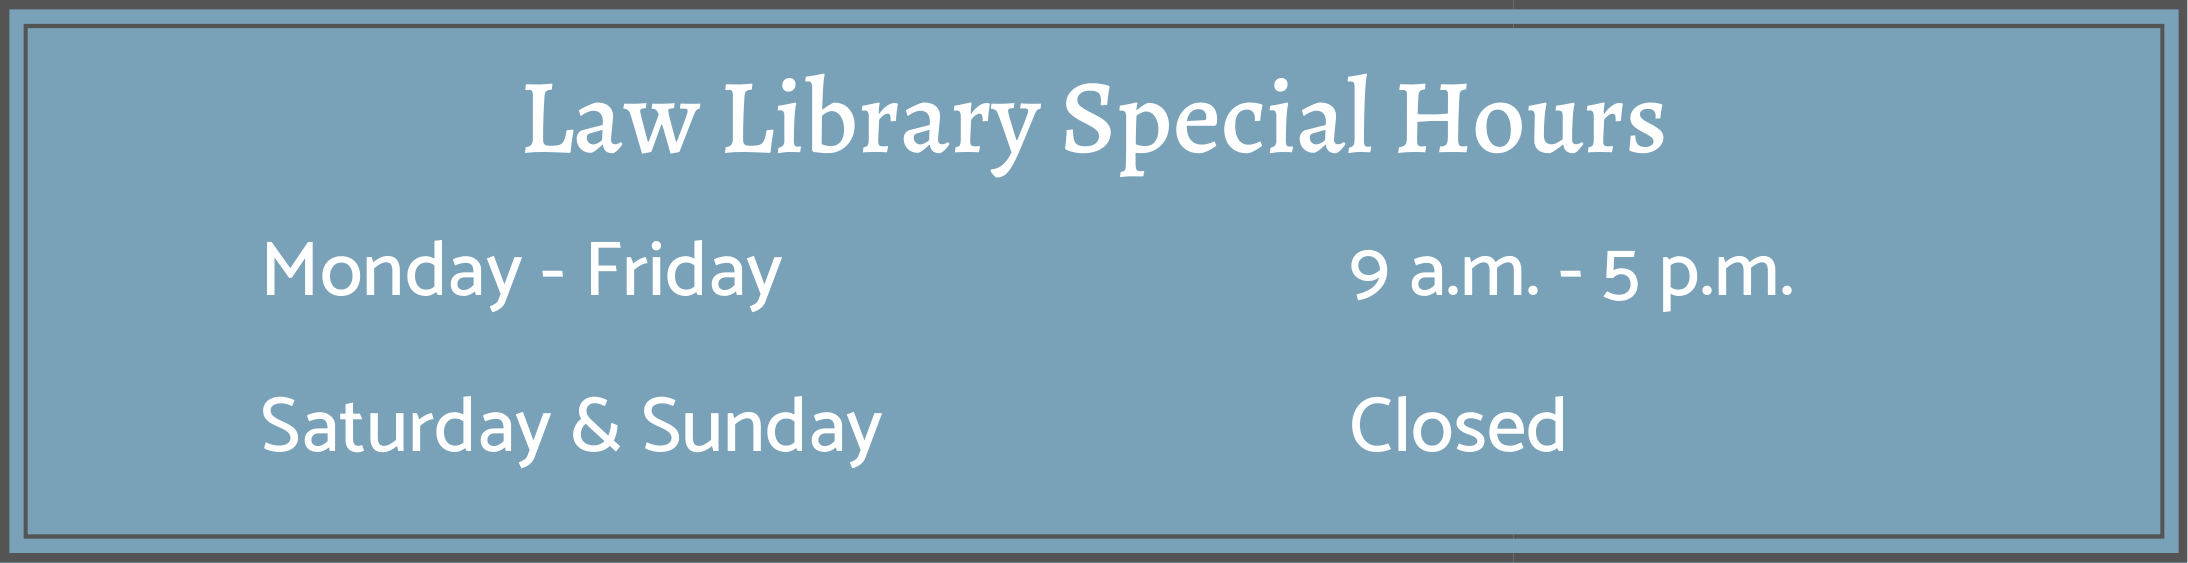 Law Library Special Hours